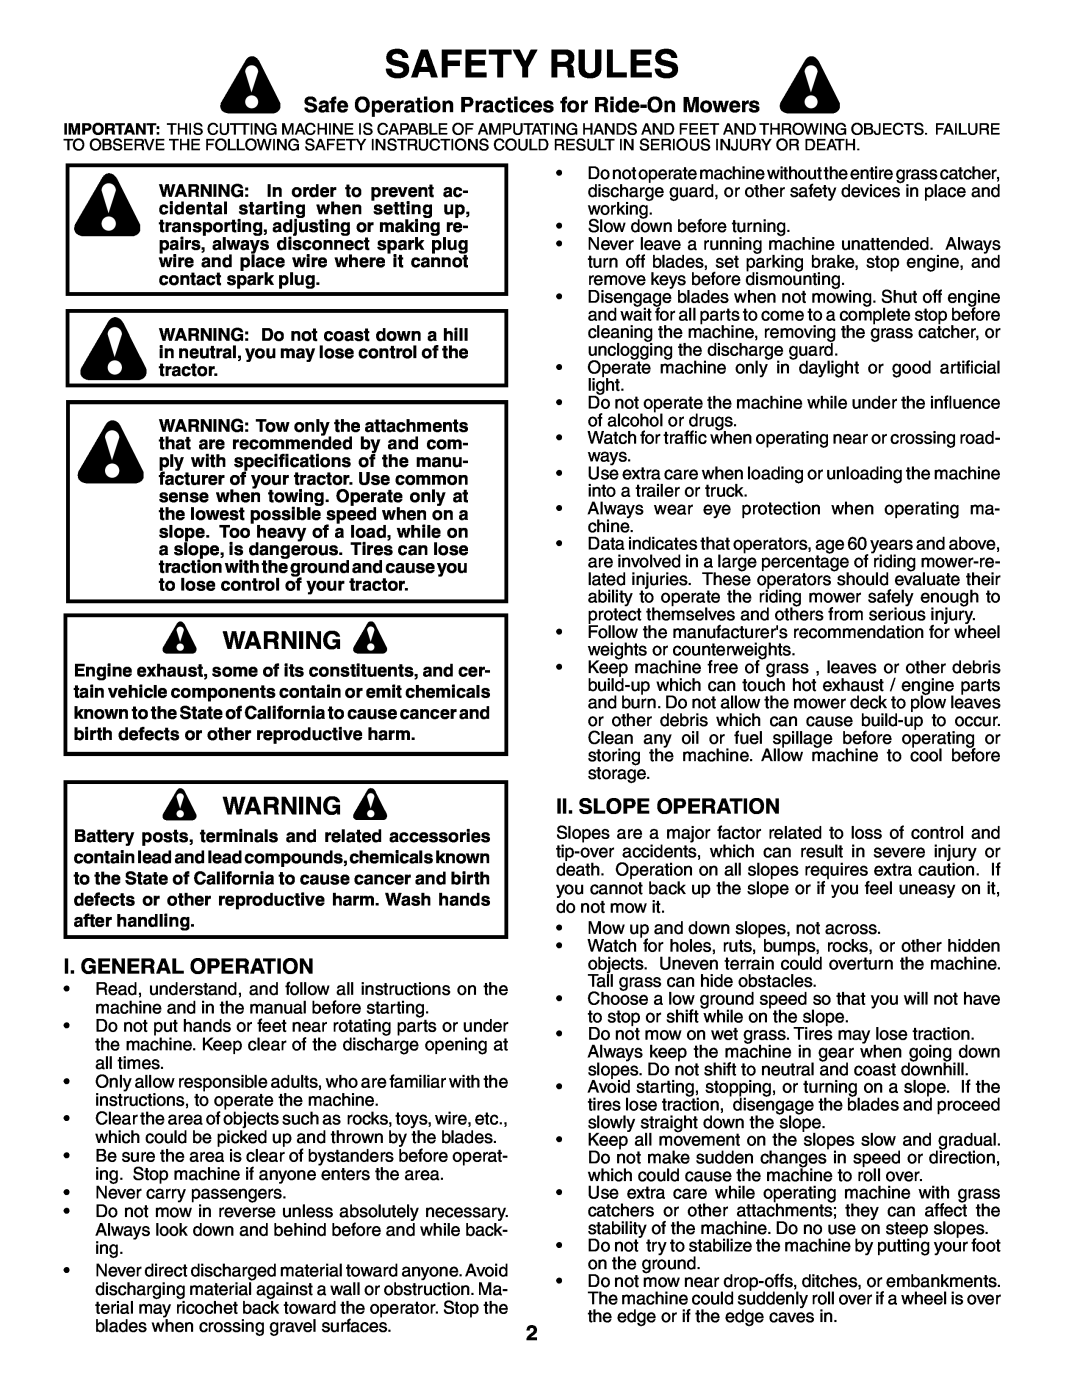 Poulan 194831 manual Safety Rules, Safe Operation Practices for Ride-On Mowers, I. General Operation, Ii. Slope Operation 